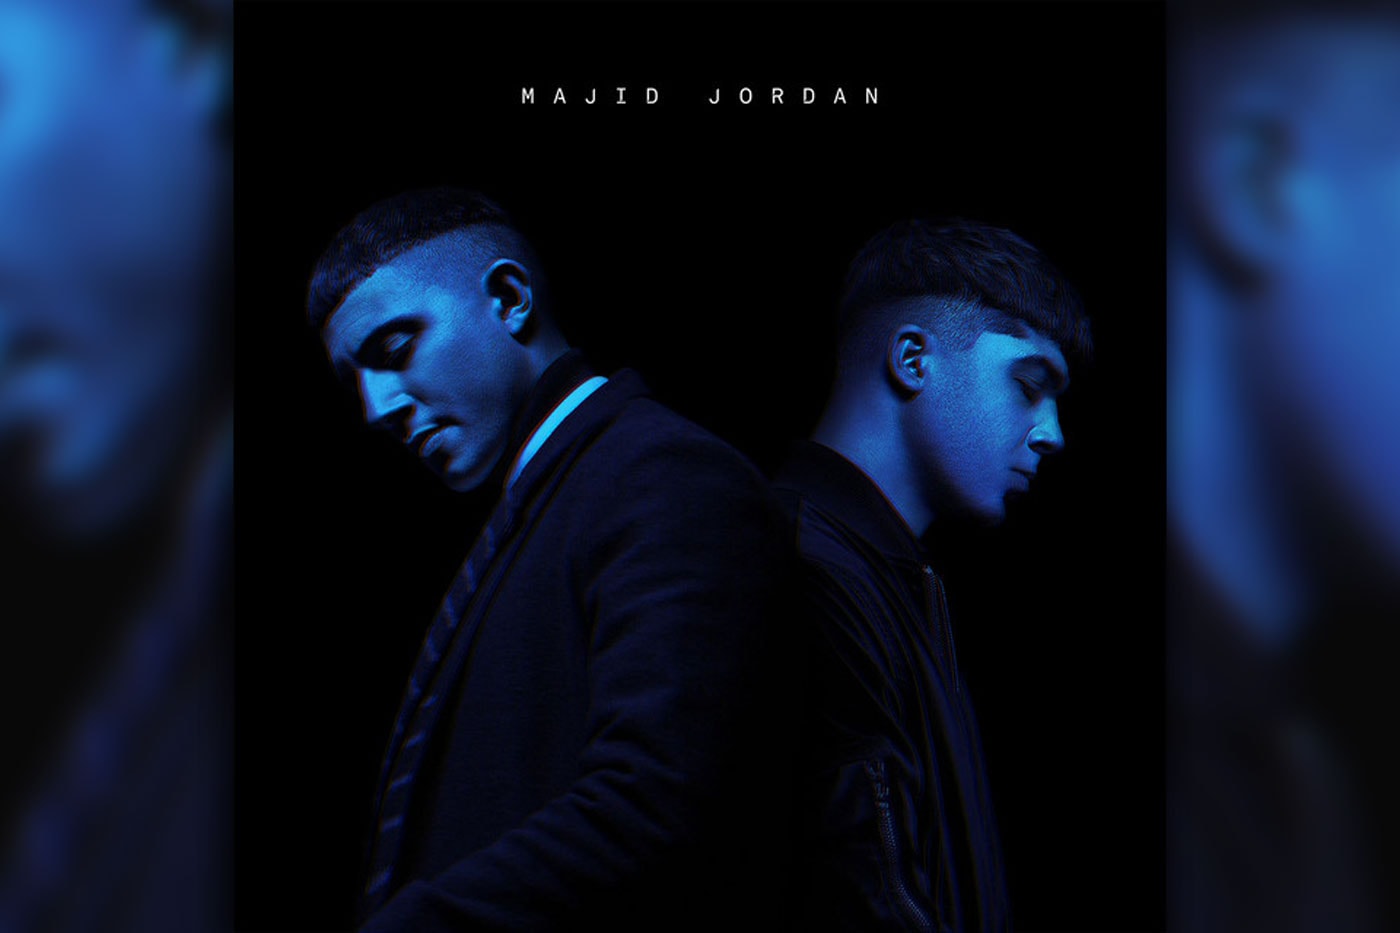 Majid Jordan Play with Fire For "Something About You" Video